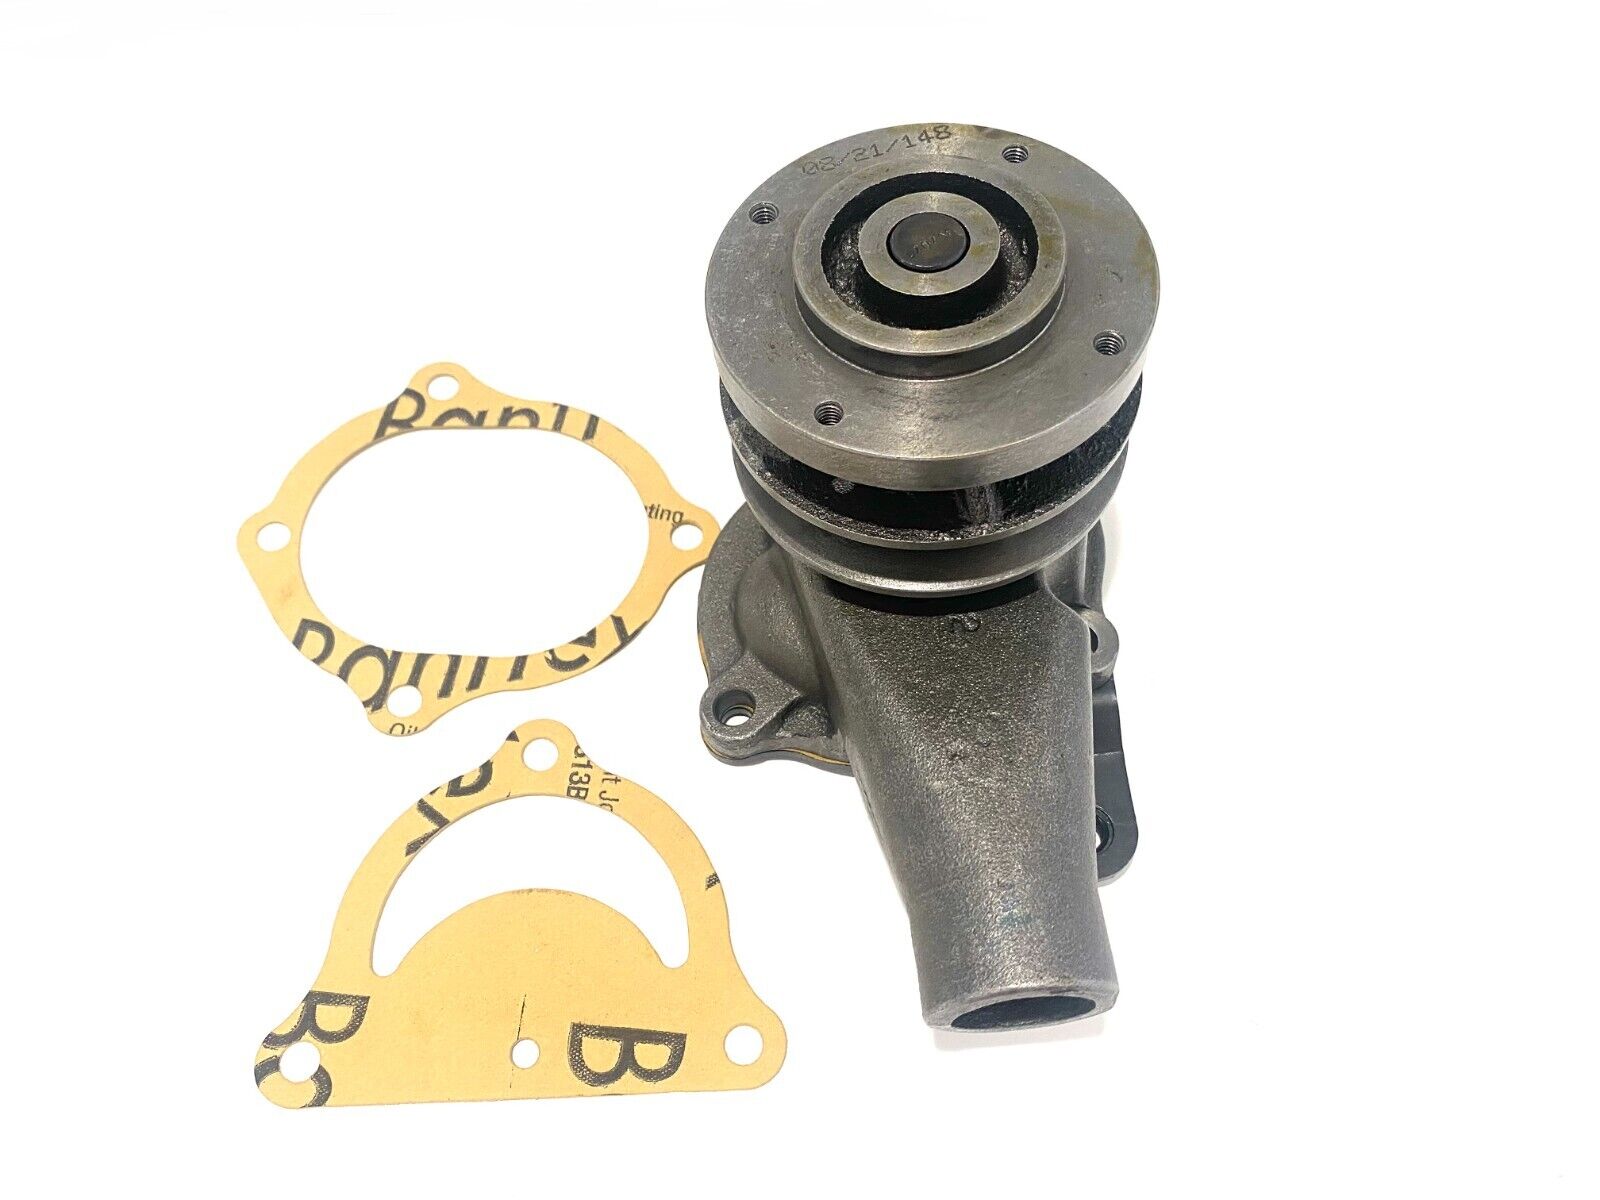 CDPN8501A For Ford Tractors 2N 8N 9N Water Pump Comes with Gaskets and Pulley Arko Tractor Parts CDPN8501A - фотография #5